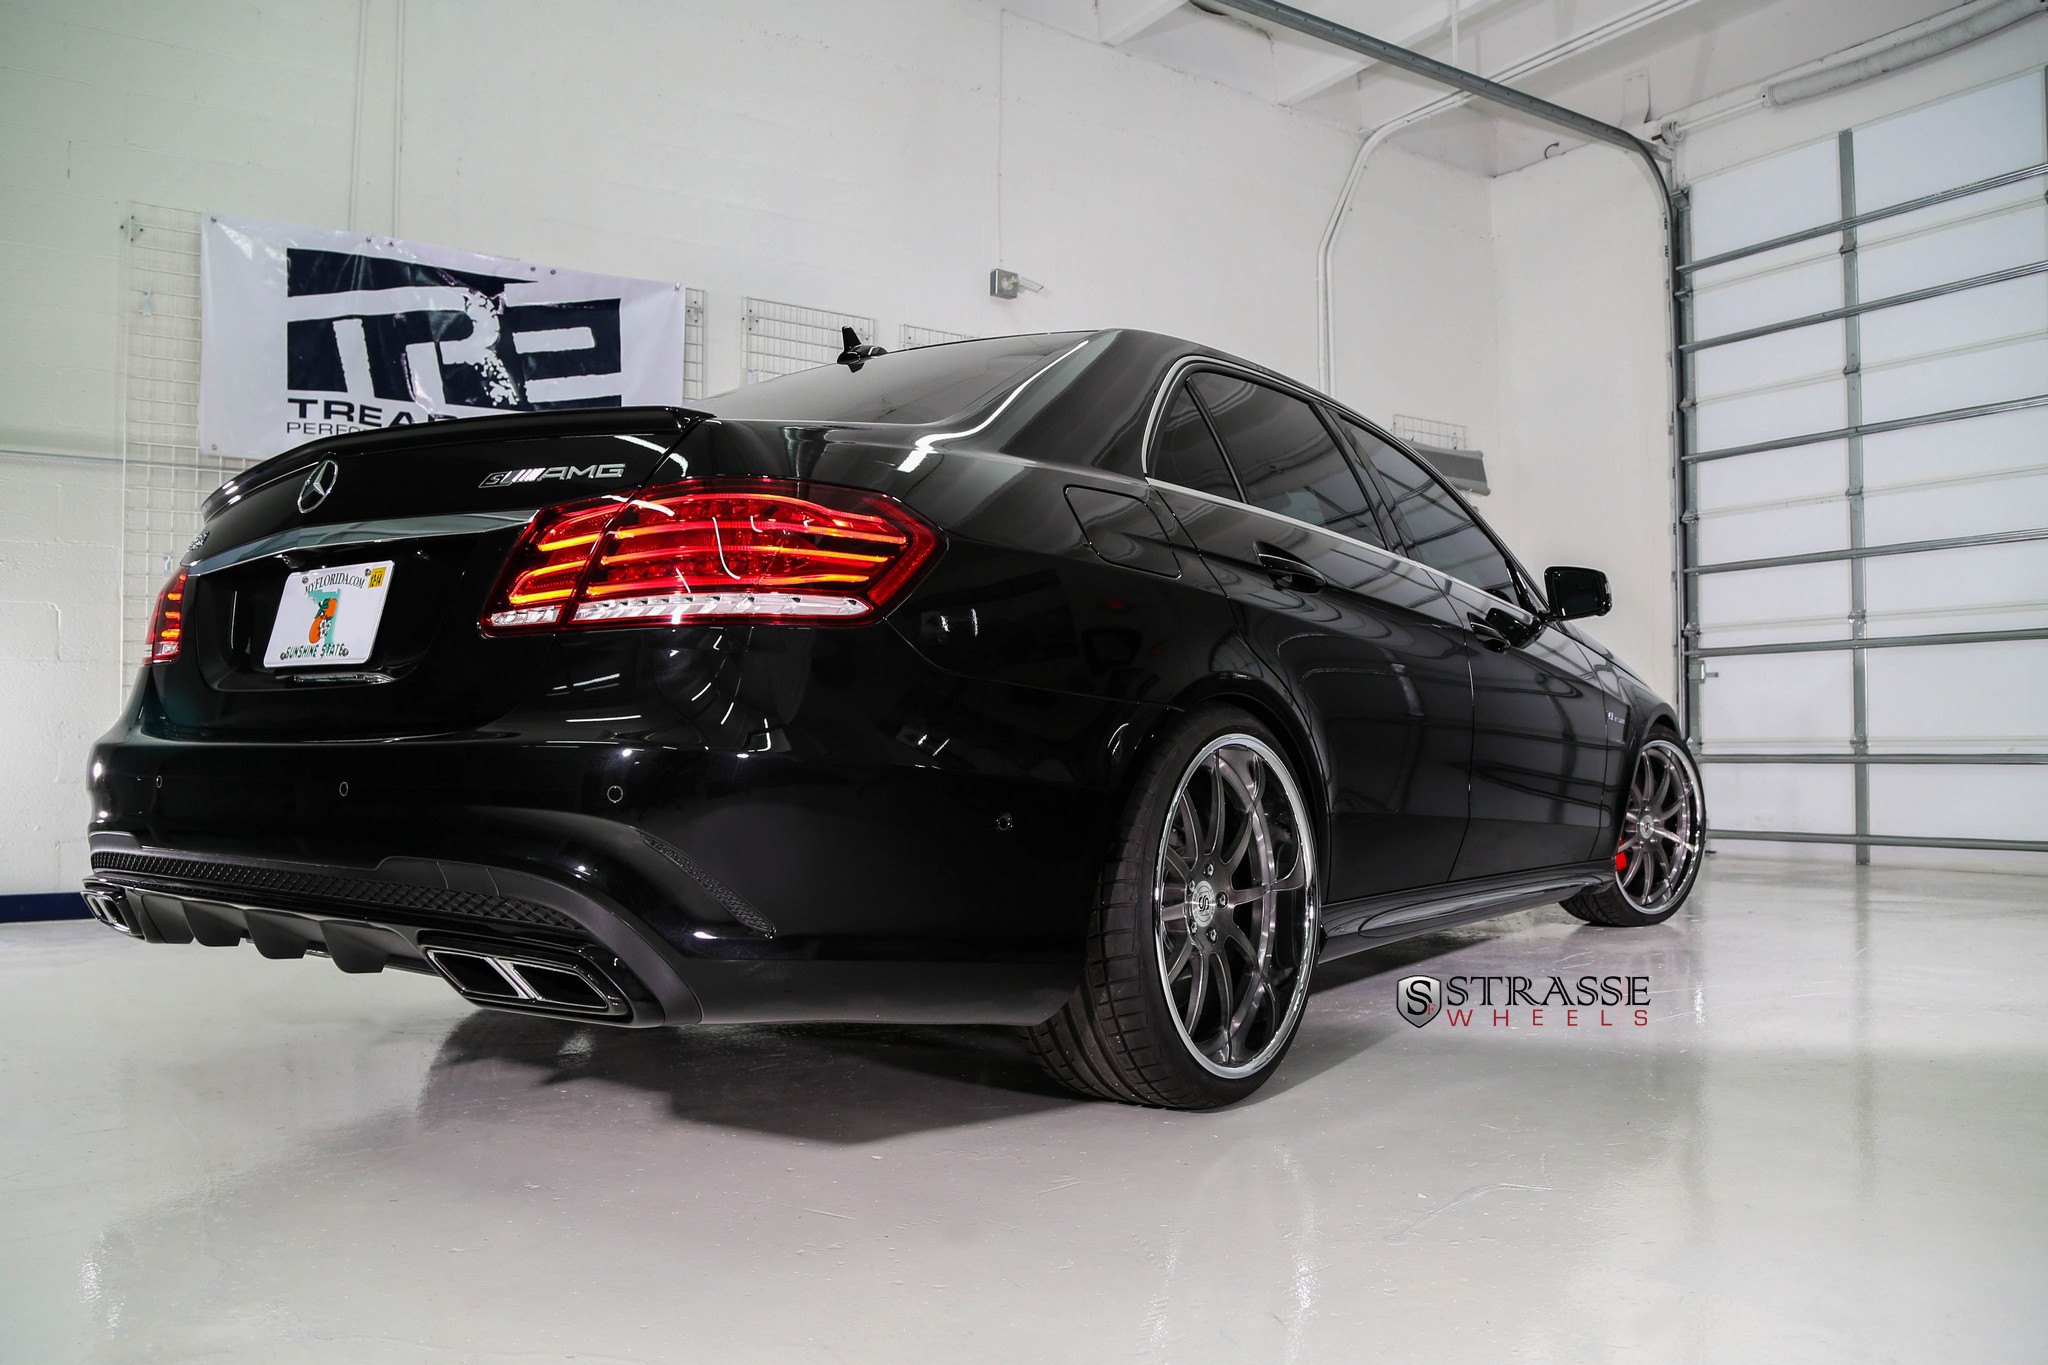 Aftermarket Rear Diffuser on Black Mercedes E-Class - Photo by Strasse Forged